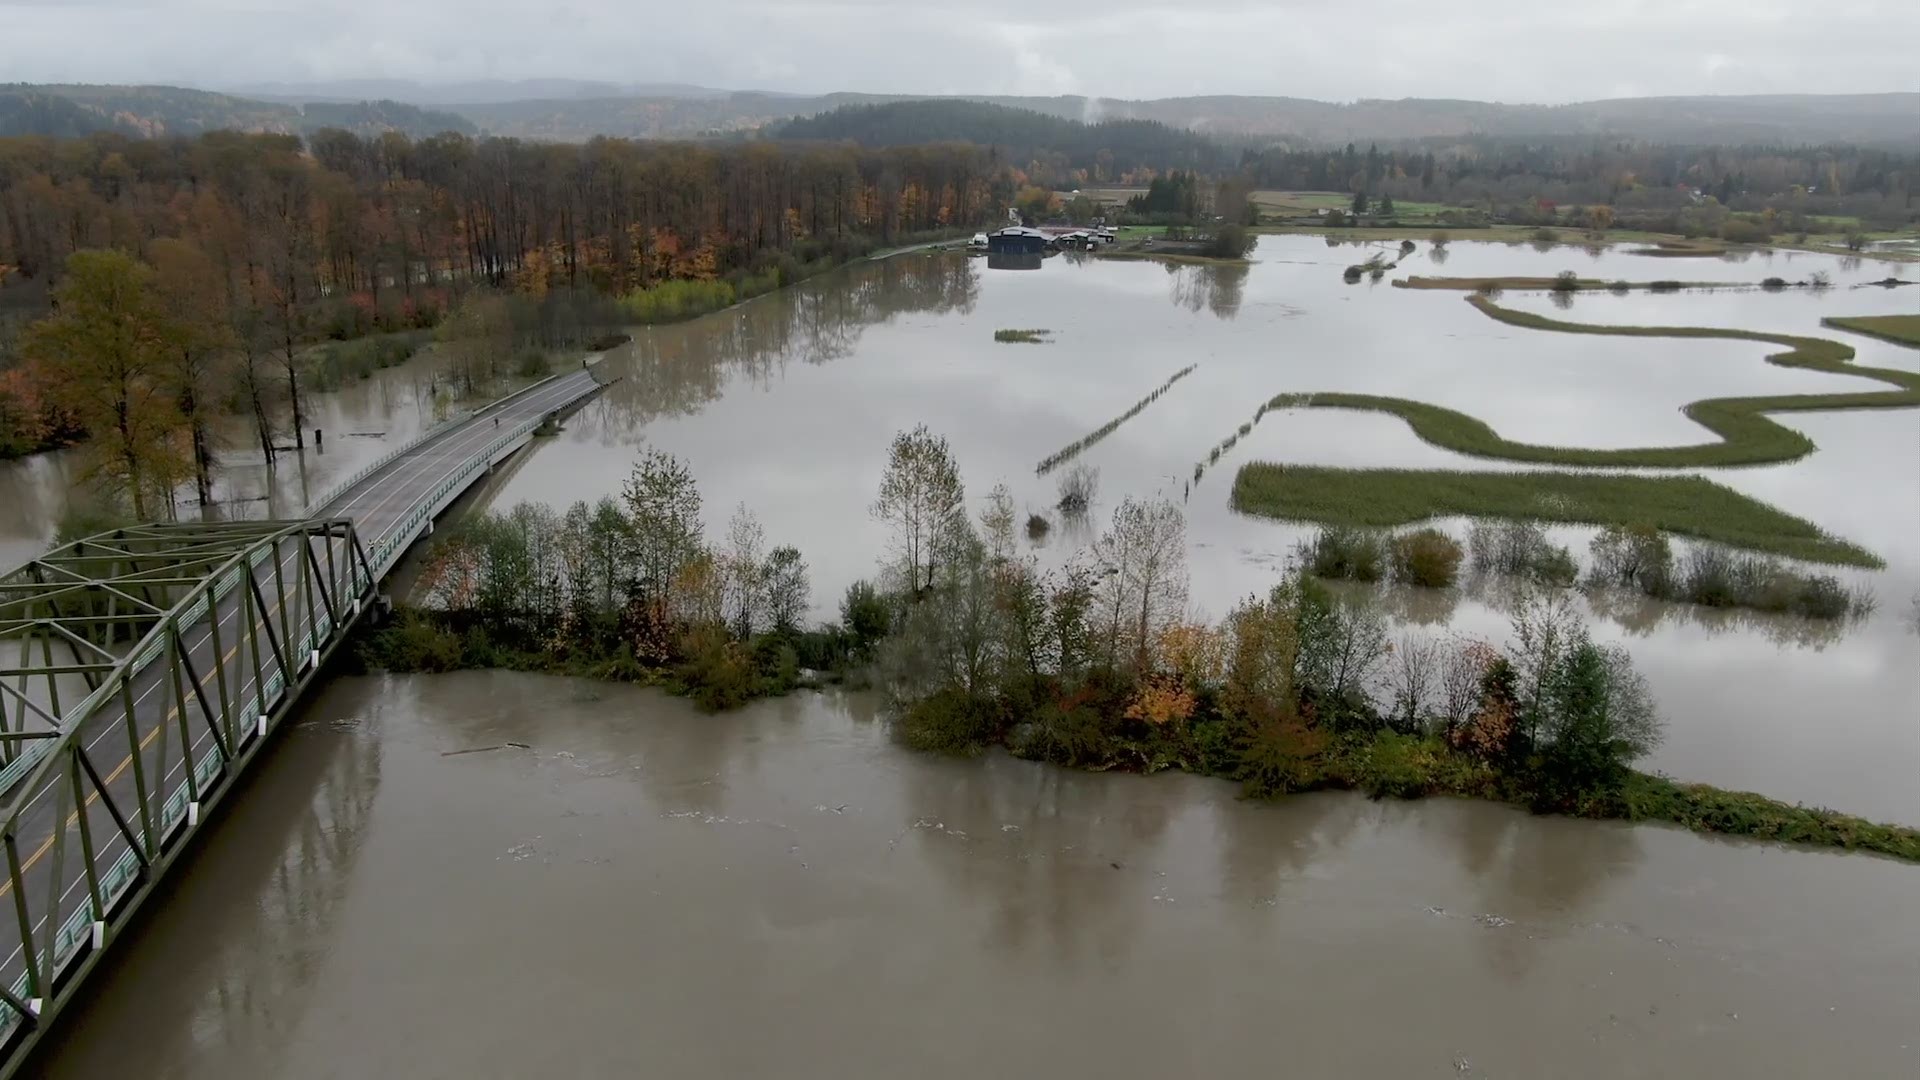 One of the KING 5 drones captured flooding conditions around the Snoqualmie area after heavy rains moved into the area on Oct. 22, 2019.